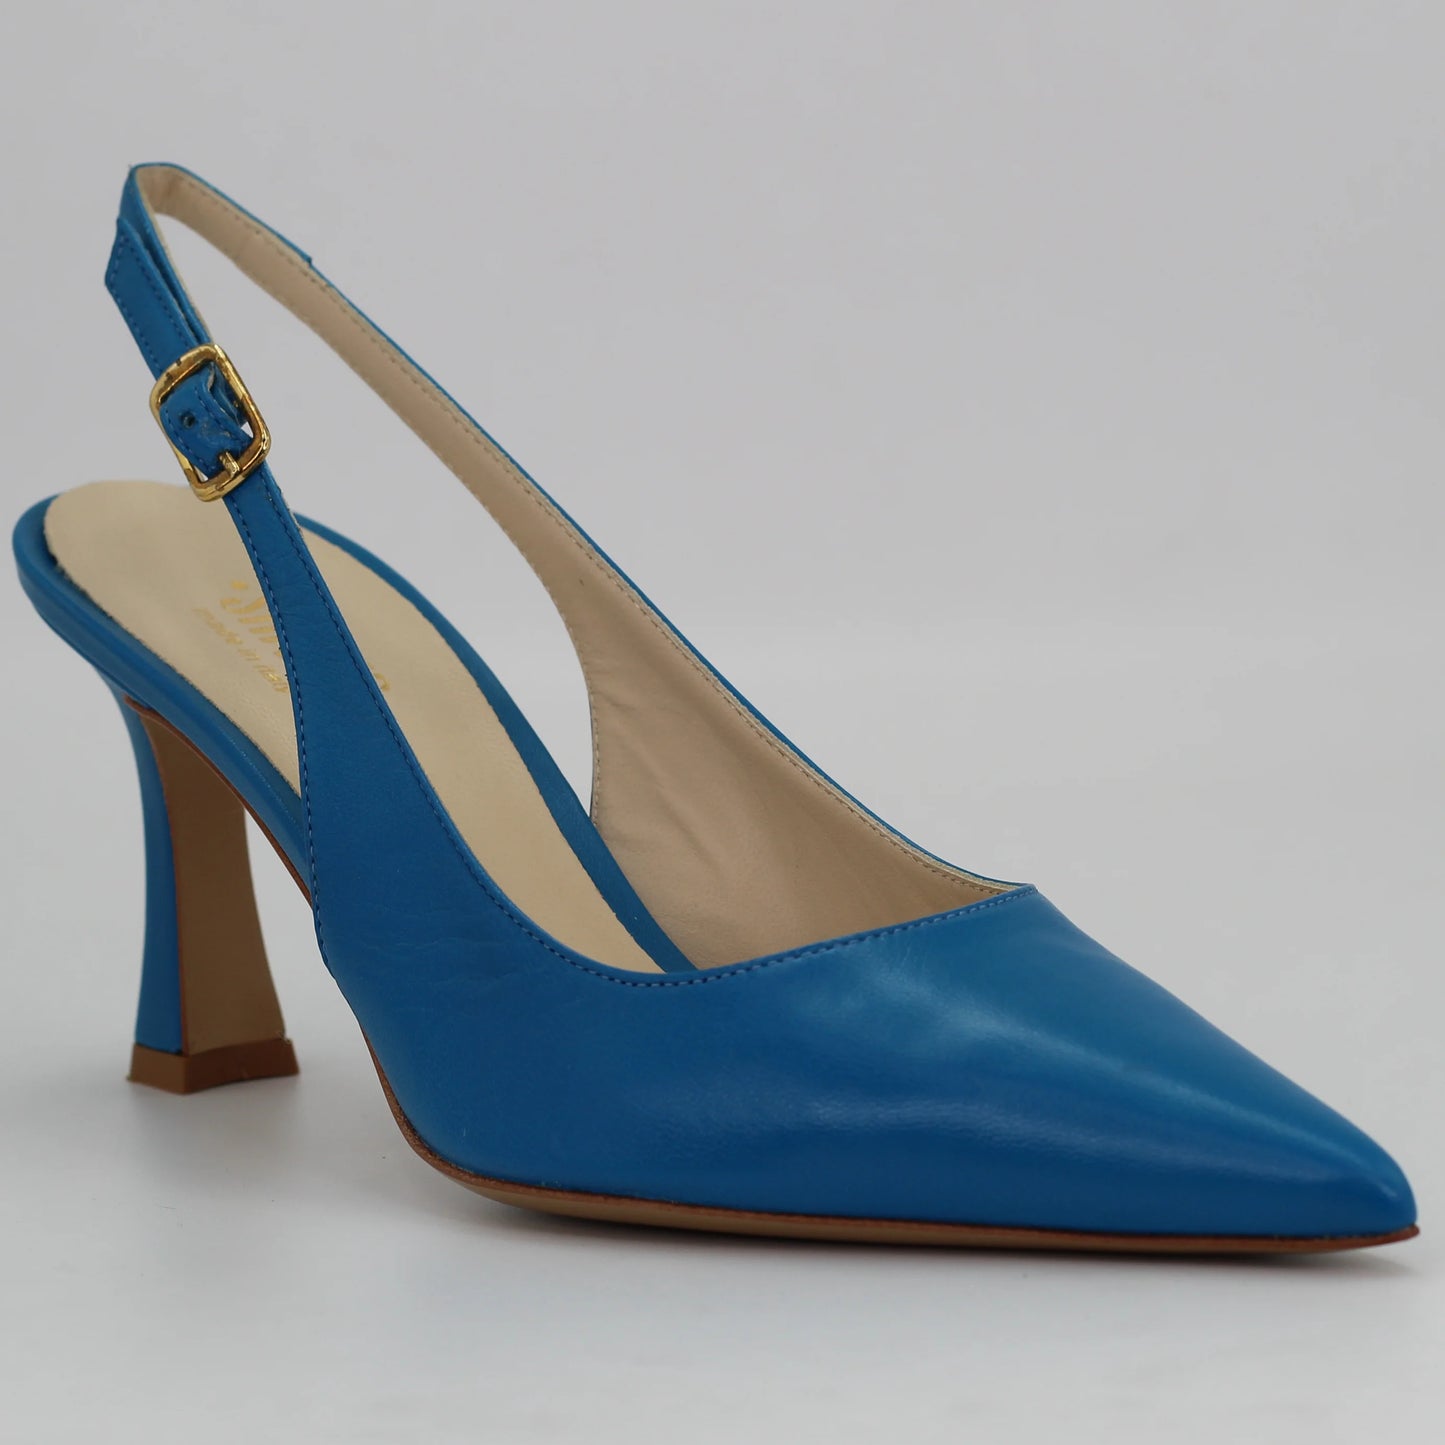 Shop Handmade Italian Leather sling back in blue (MPE581) or browse our range of hand-made Italian shoes in leather or suede in-store at Aliverti Cape Town, or shop online. We deliver in South Africa & offer multiple payment plans as well as accept multiple safe & secure payment methods.